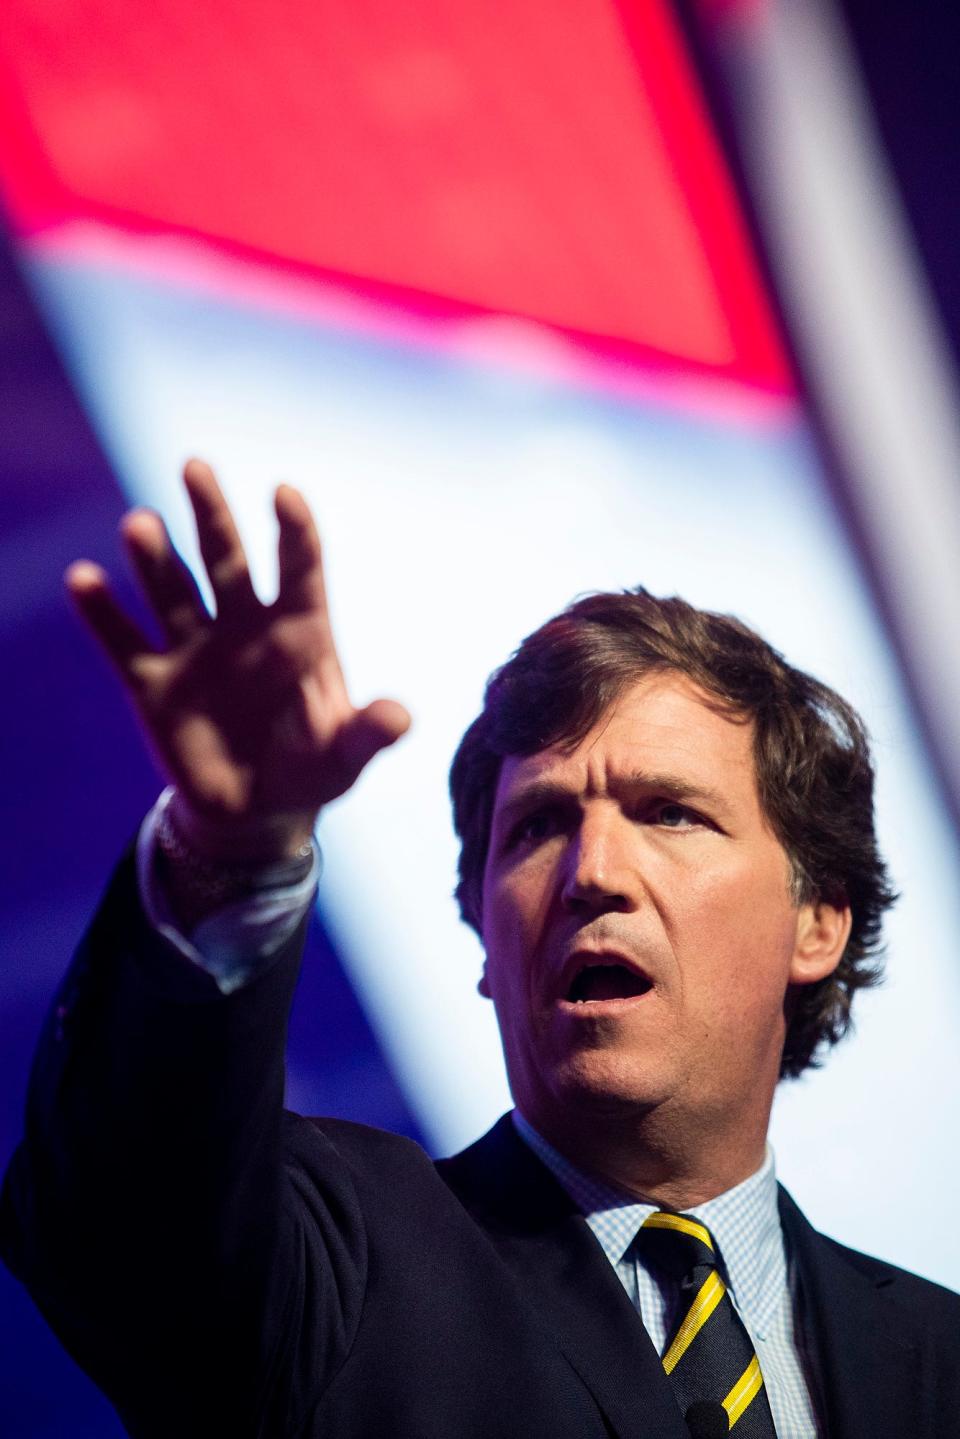 Tucker Carlson speaks during the first day of the America Fest 2021 hosted by Turning Point USA on Saturday, Dec. 18, 2021, in Phoenix. 